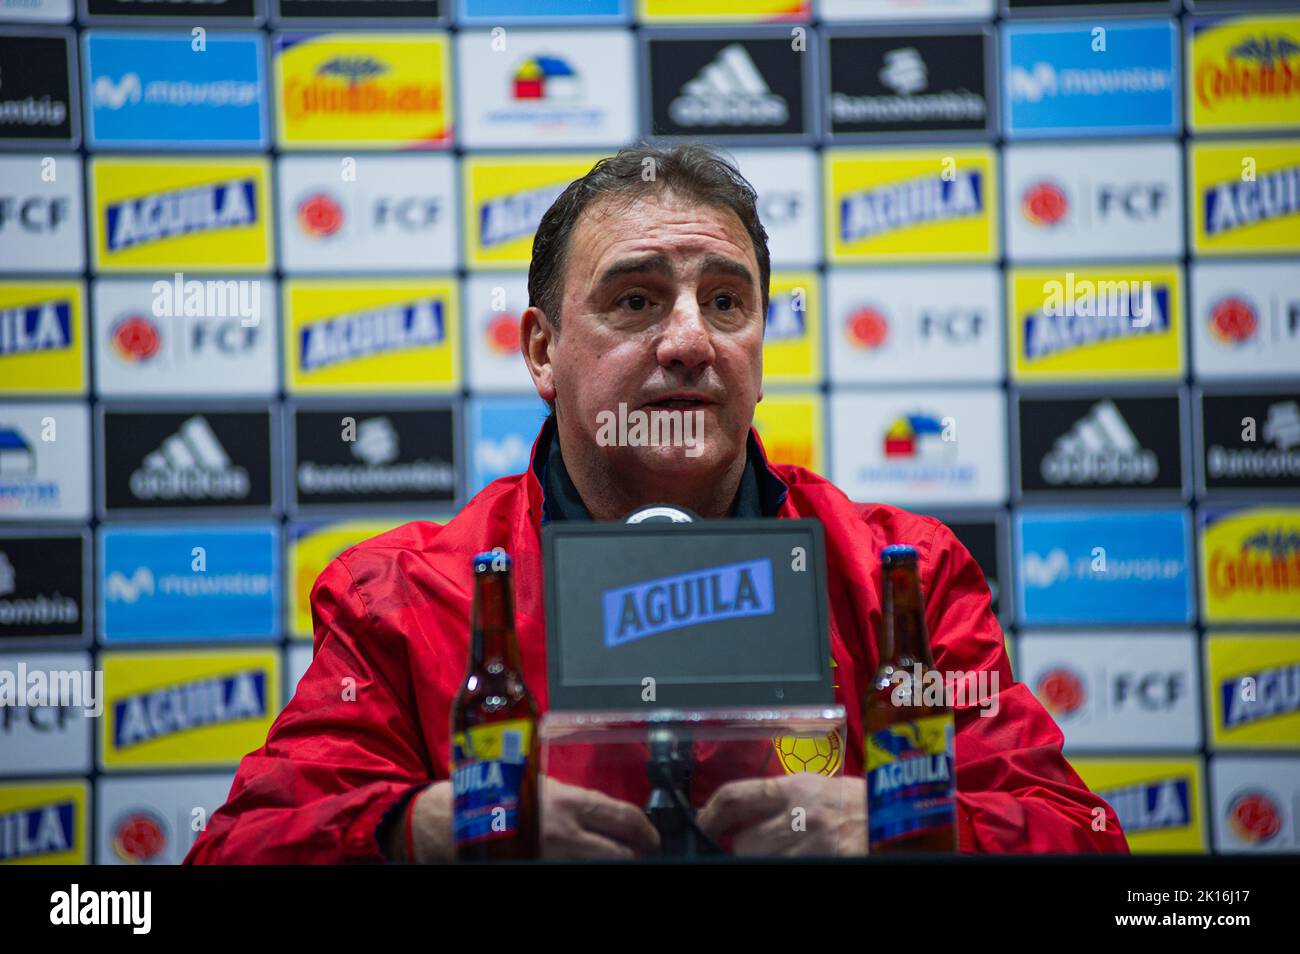 Bogota, Colombia. 15th Sep, 2022. Colombia's football team coah Nestor Lorenzo speaks during a press conference after the decision on calling team veterans: Radamel Falcao, James Rodriguez and Luis Diaz, in Bogota, Colombia, September 15, 2022, for the friendly matches tour in the United States for the Septemeber FIFA Matches against Guatemala on september 24 in New York and against Mexico on september 27. Credit: Long Visual Press/Alamy Live News Stock Photo